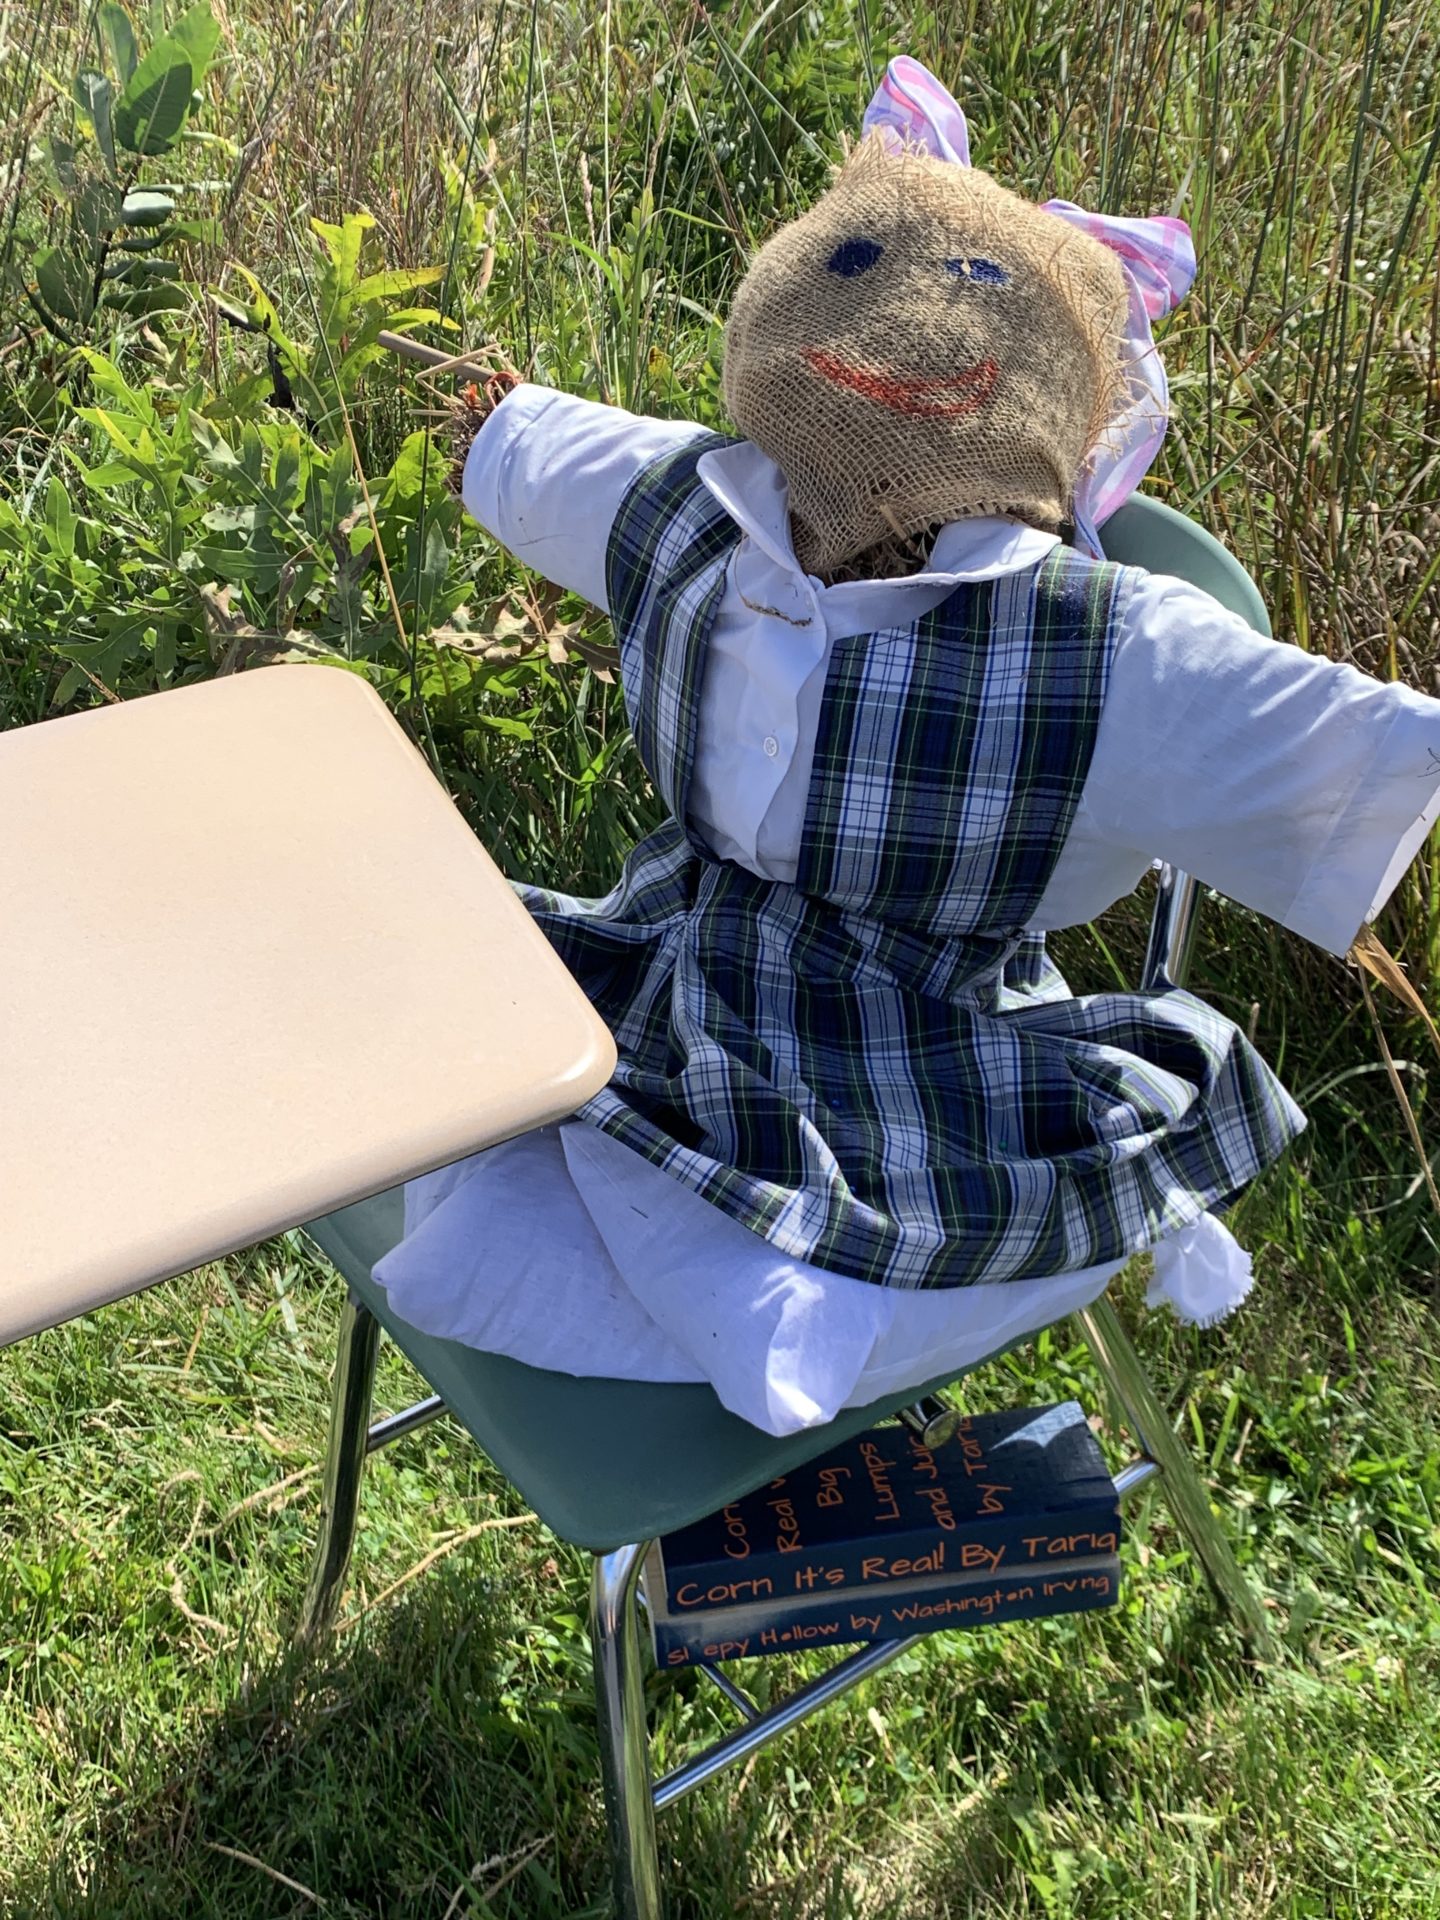 Scarecrow Trail at Prophetstown